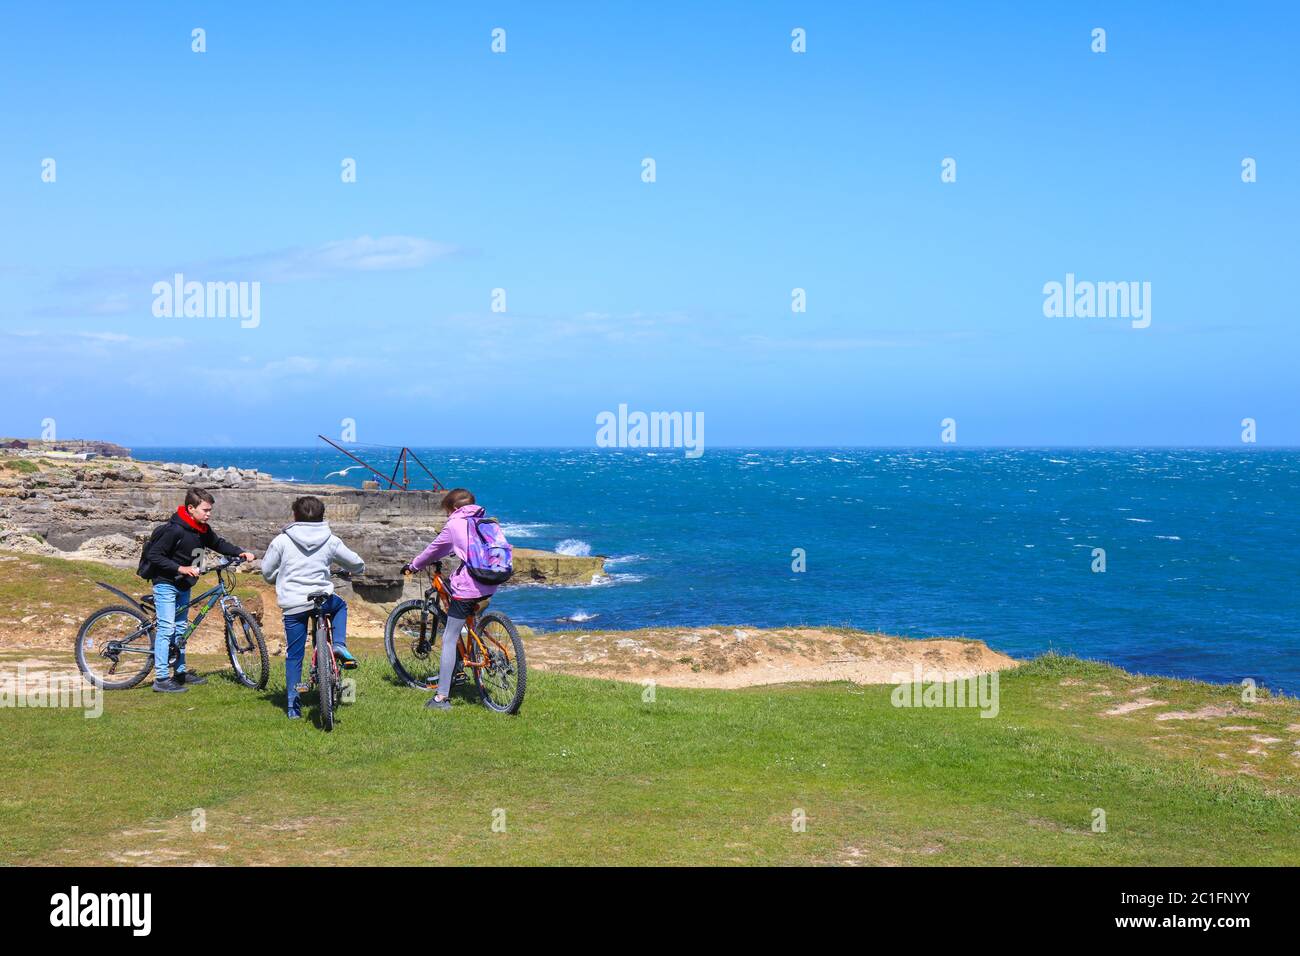 Isle of Portland, Dorset / UK - May 23, 2020: Three teenager with mountain bike on the cliff edge with blue sky and horizon over the water. Stock Photo